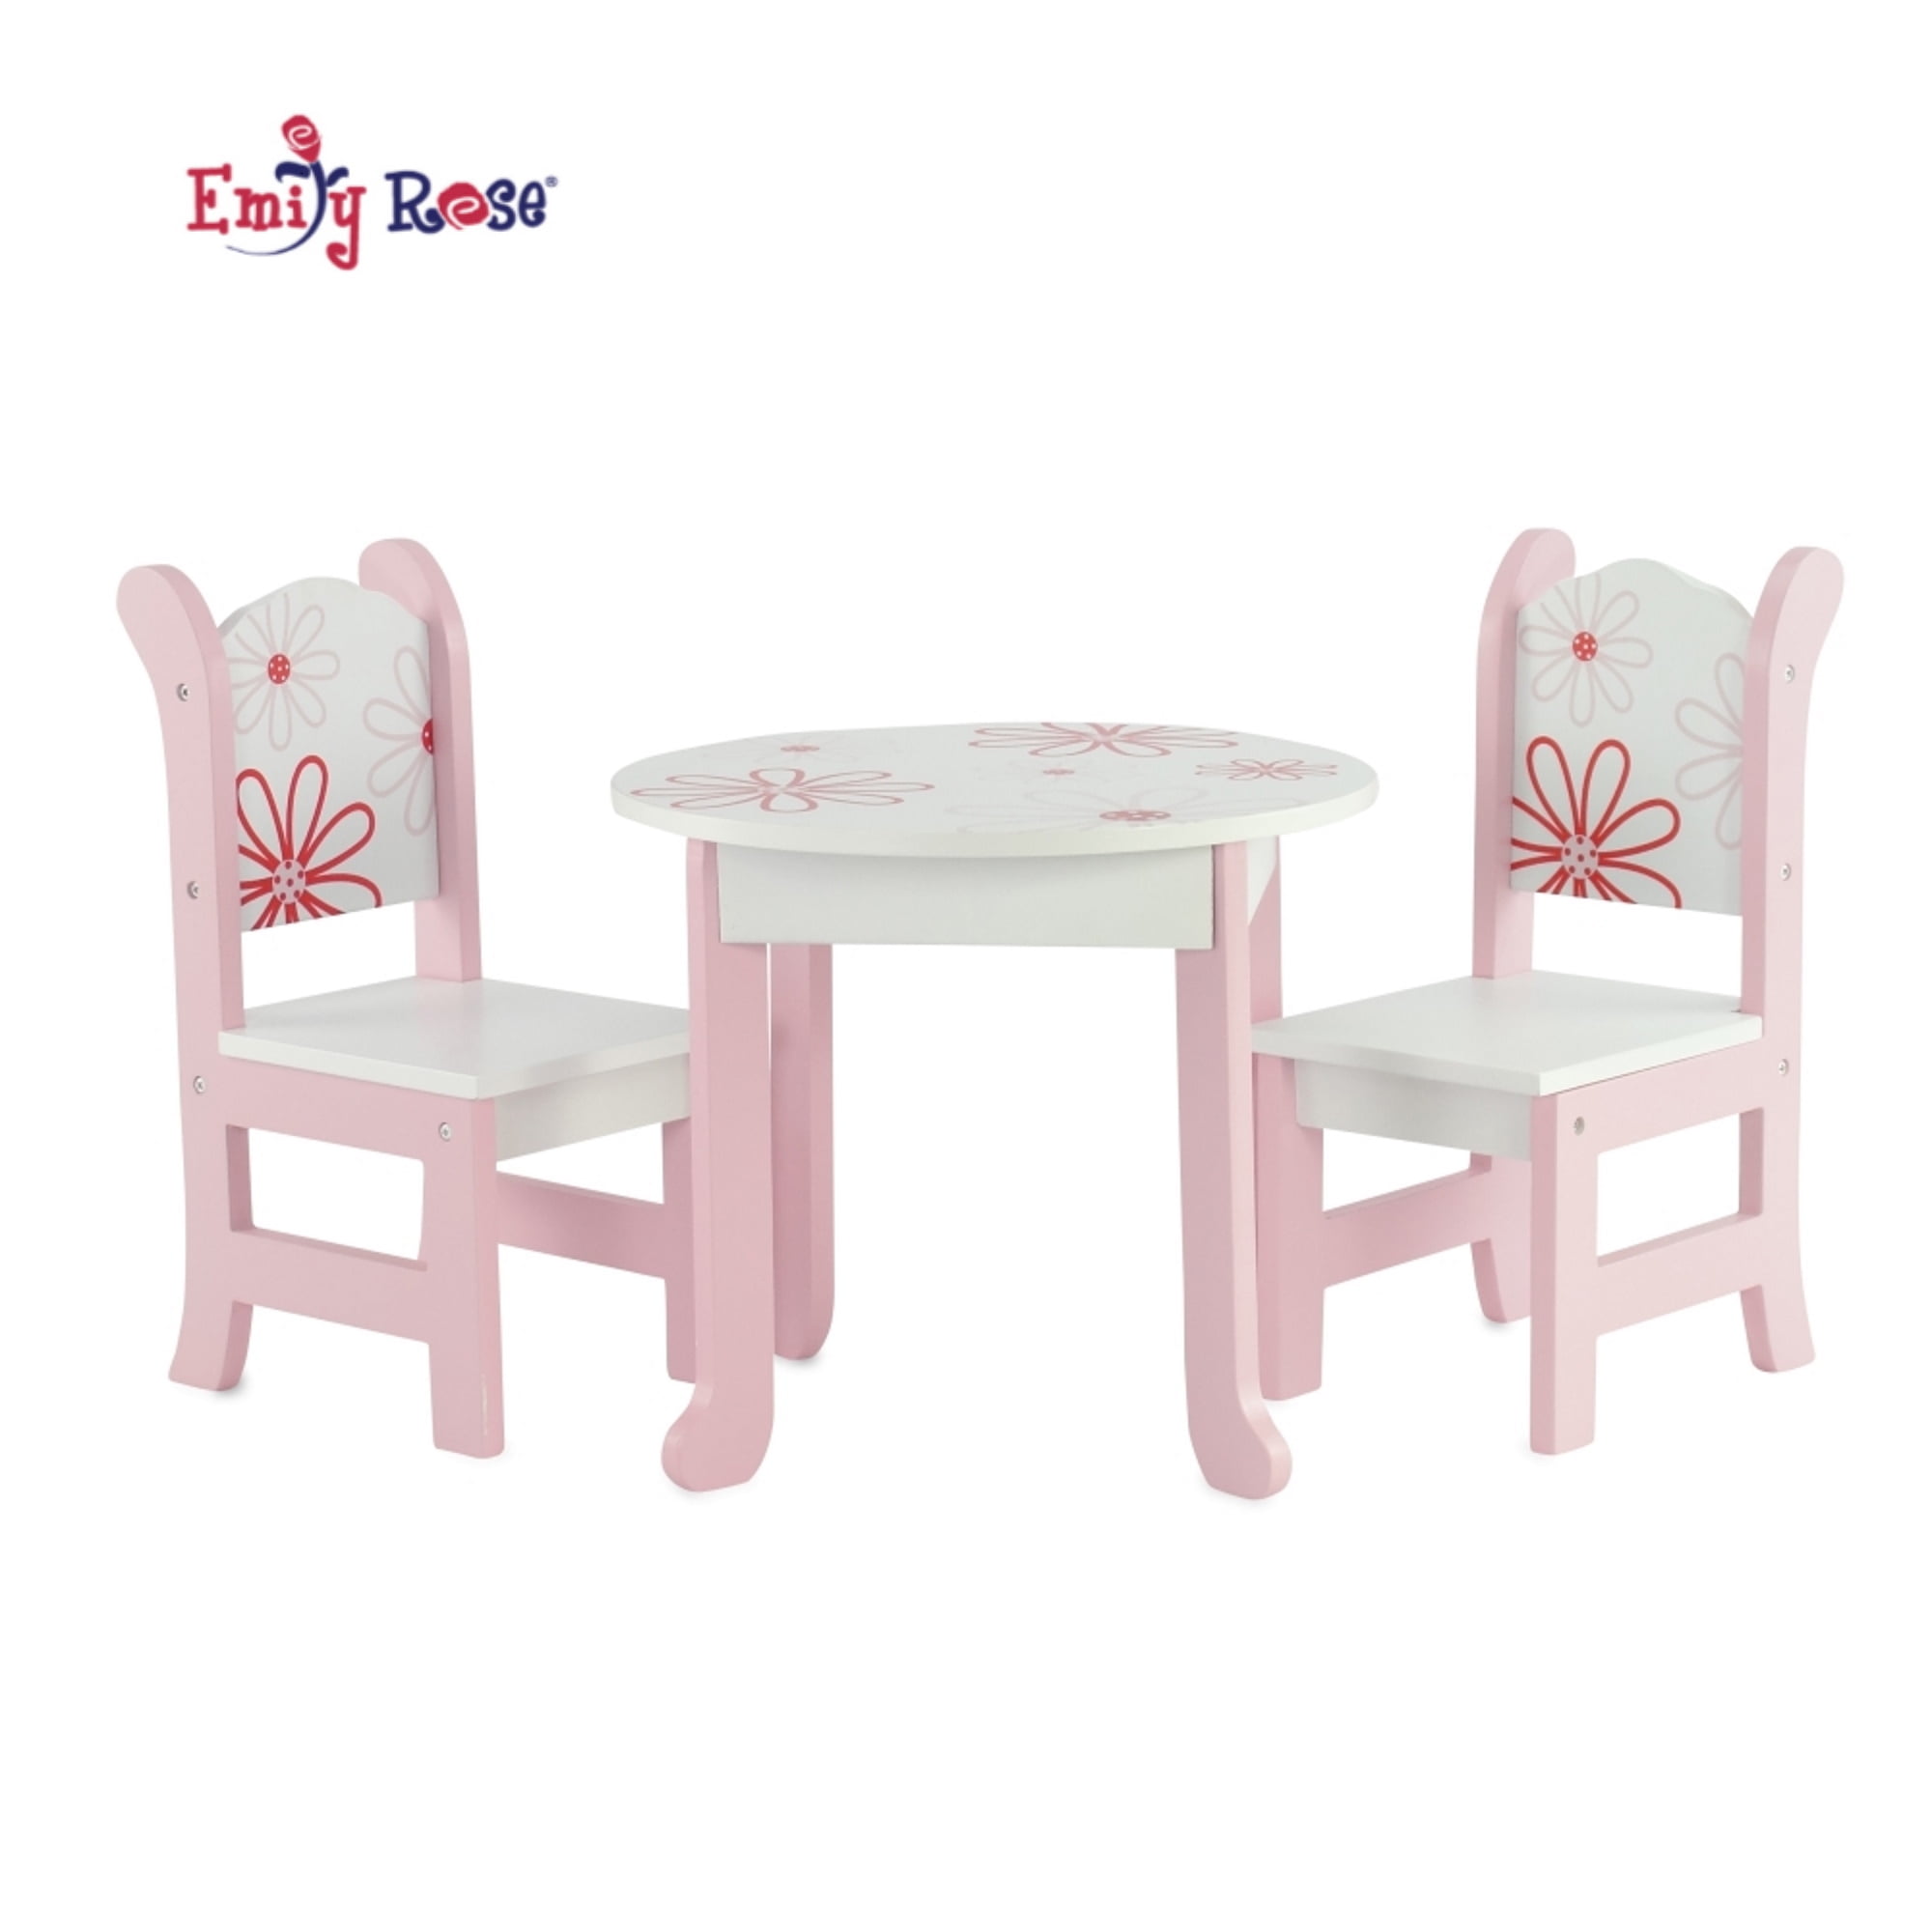 Emily Rose 18 Inch Doll Furniture Fits 18" American Girl Dolls Floral Doll and